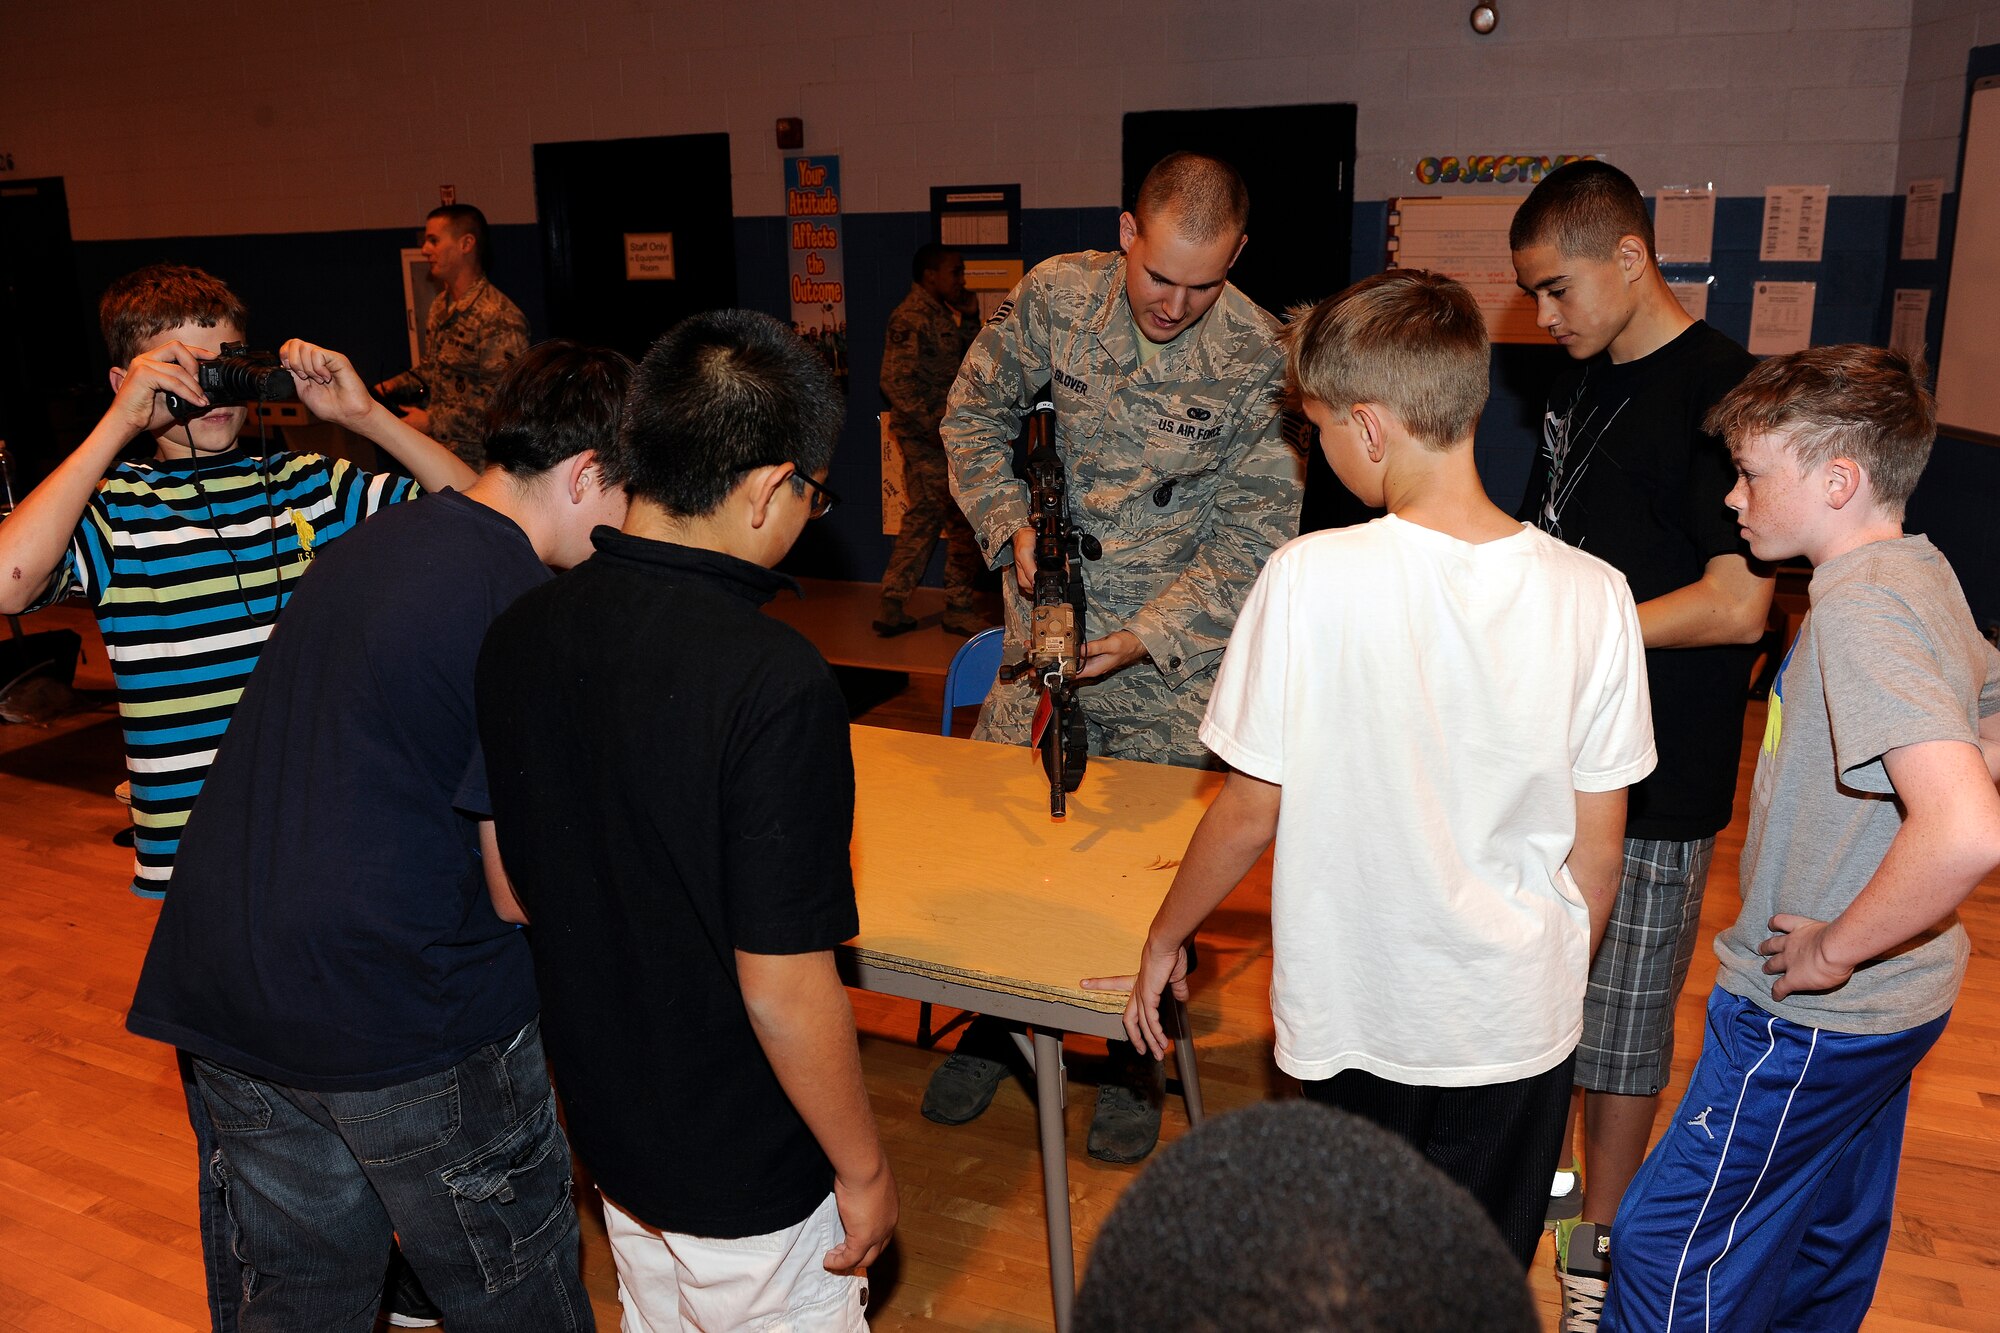 Staff Sgt. Joseph Glover, 49th Security Forces Squadron, displays various tactical devices to students during Holloman Middle School's Science Discovery Night at Holloman Air Force Base, N.M., Oct. 18. Students of HMS, as well as various base organizations, displayed projects for all to see. (U.S. Air Force photo by Master Sgt. Kevin P. Milliken/Released)